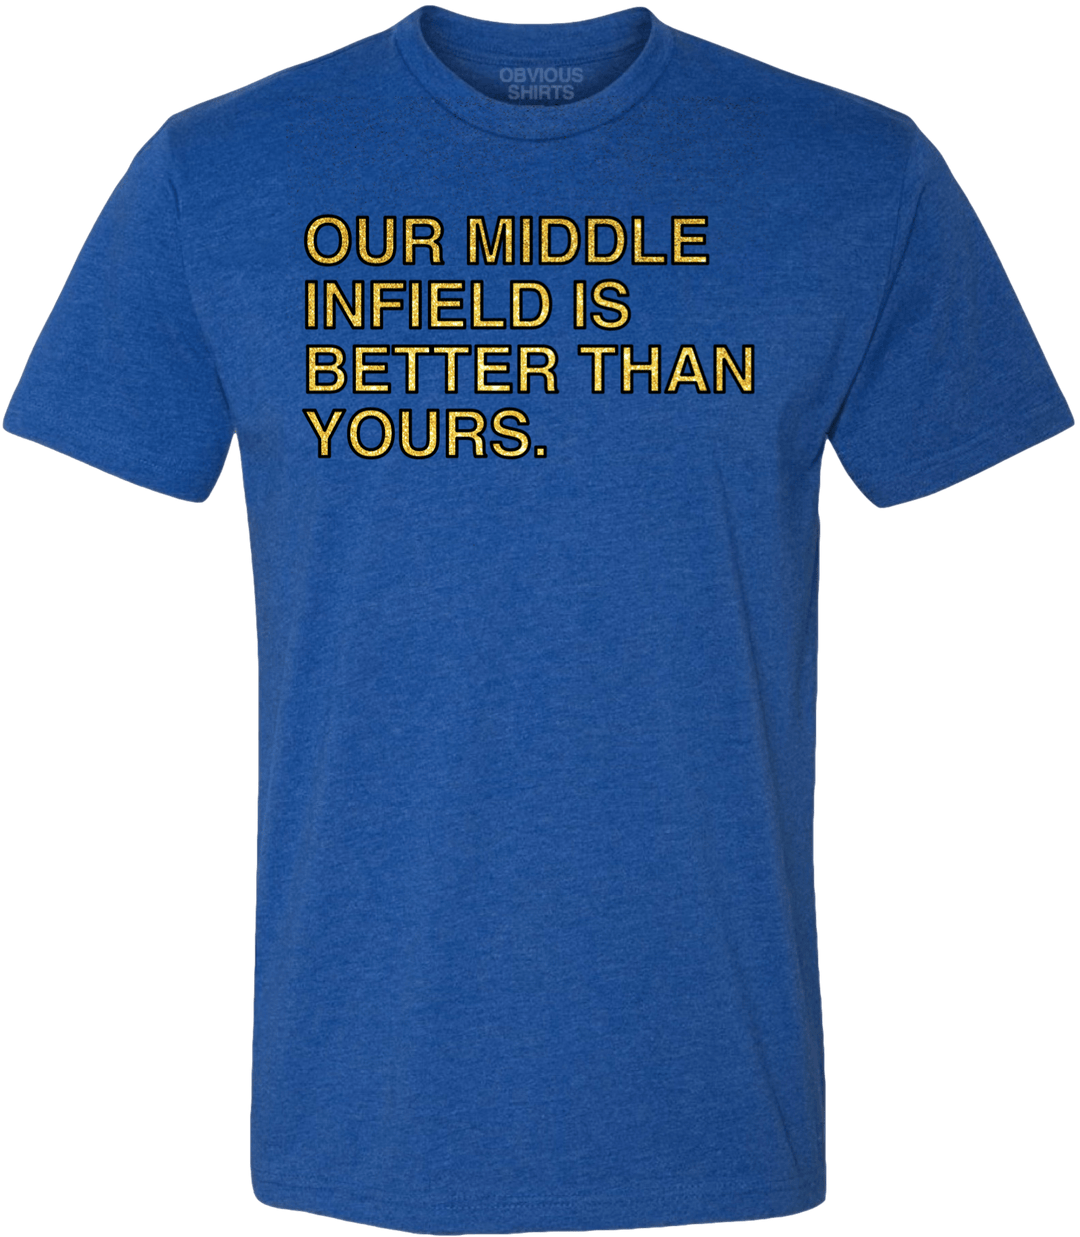 OUR MIDDLE INFIELD IS BETTER THAN YOURS. - OBVIOUS SHIRTS